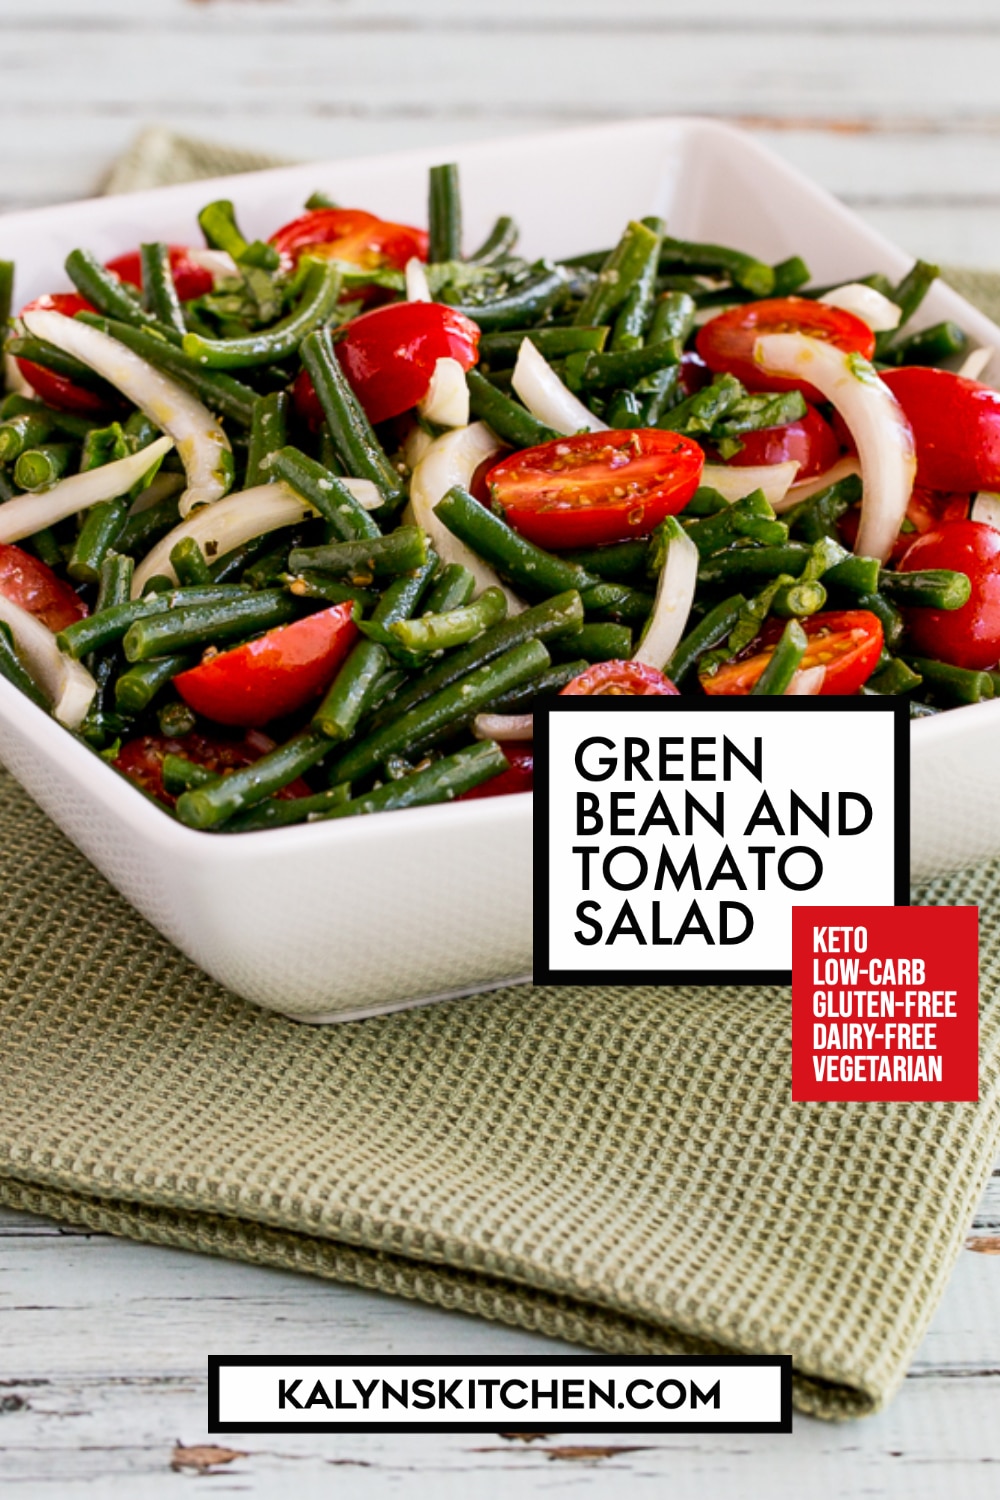 Pinterest image of Green Bean and Tomato Salad